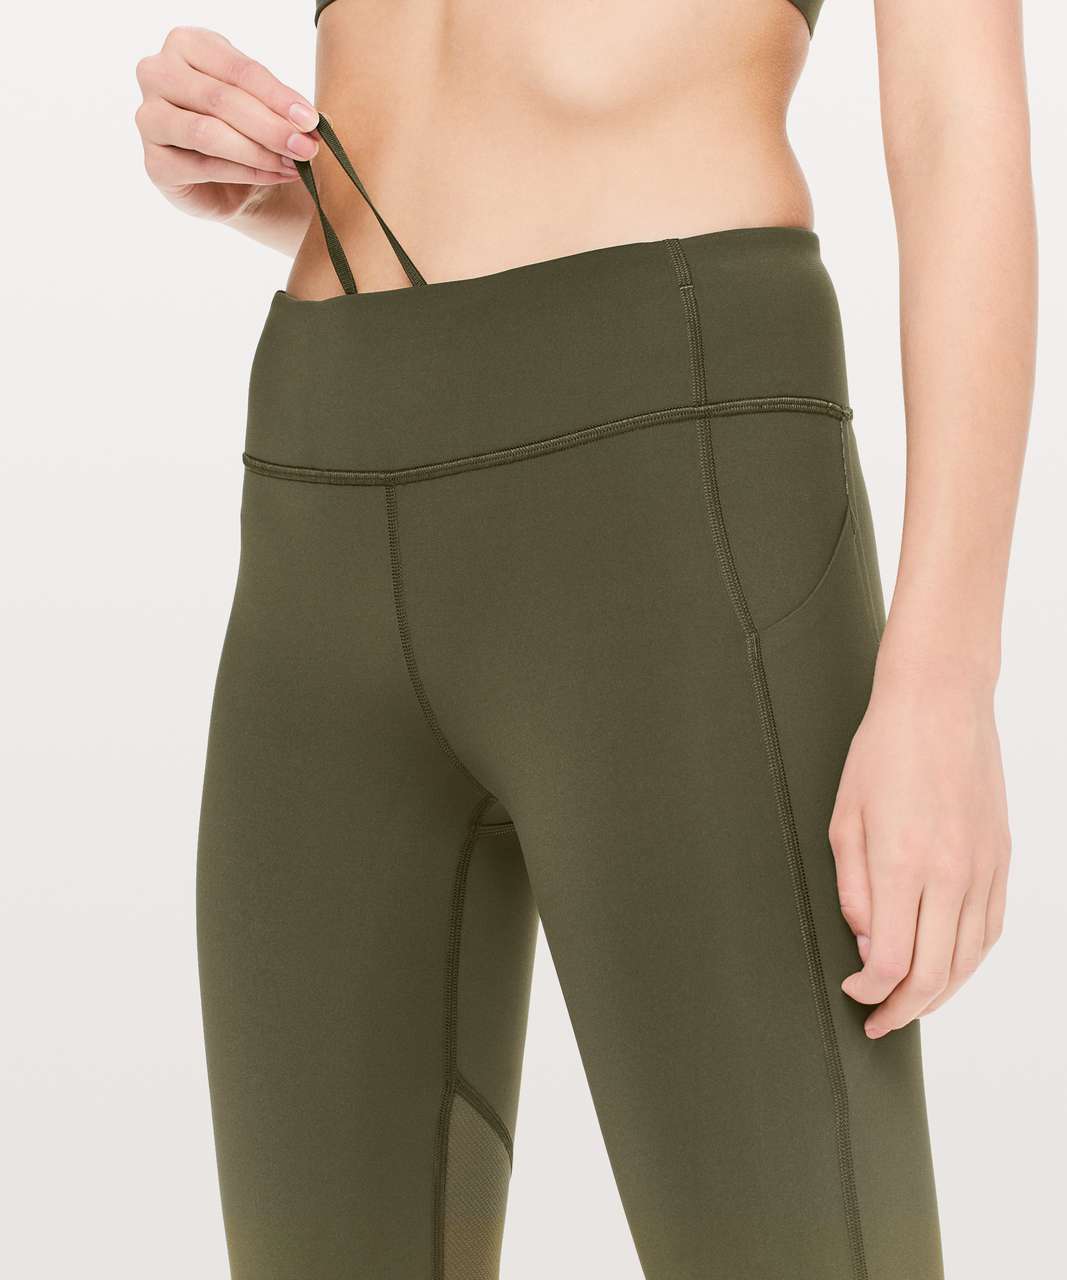 Lululemon Pace Rival Crop *Full-On Luxtreme 22" - Dark Olive